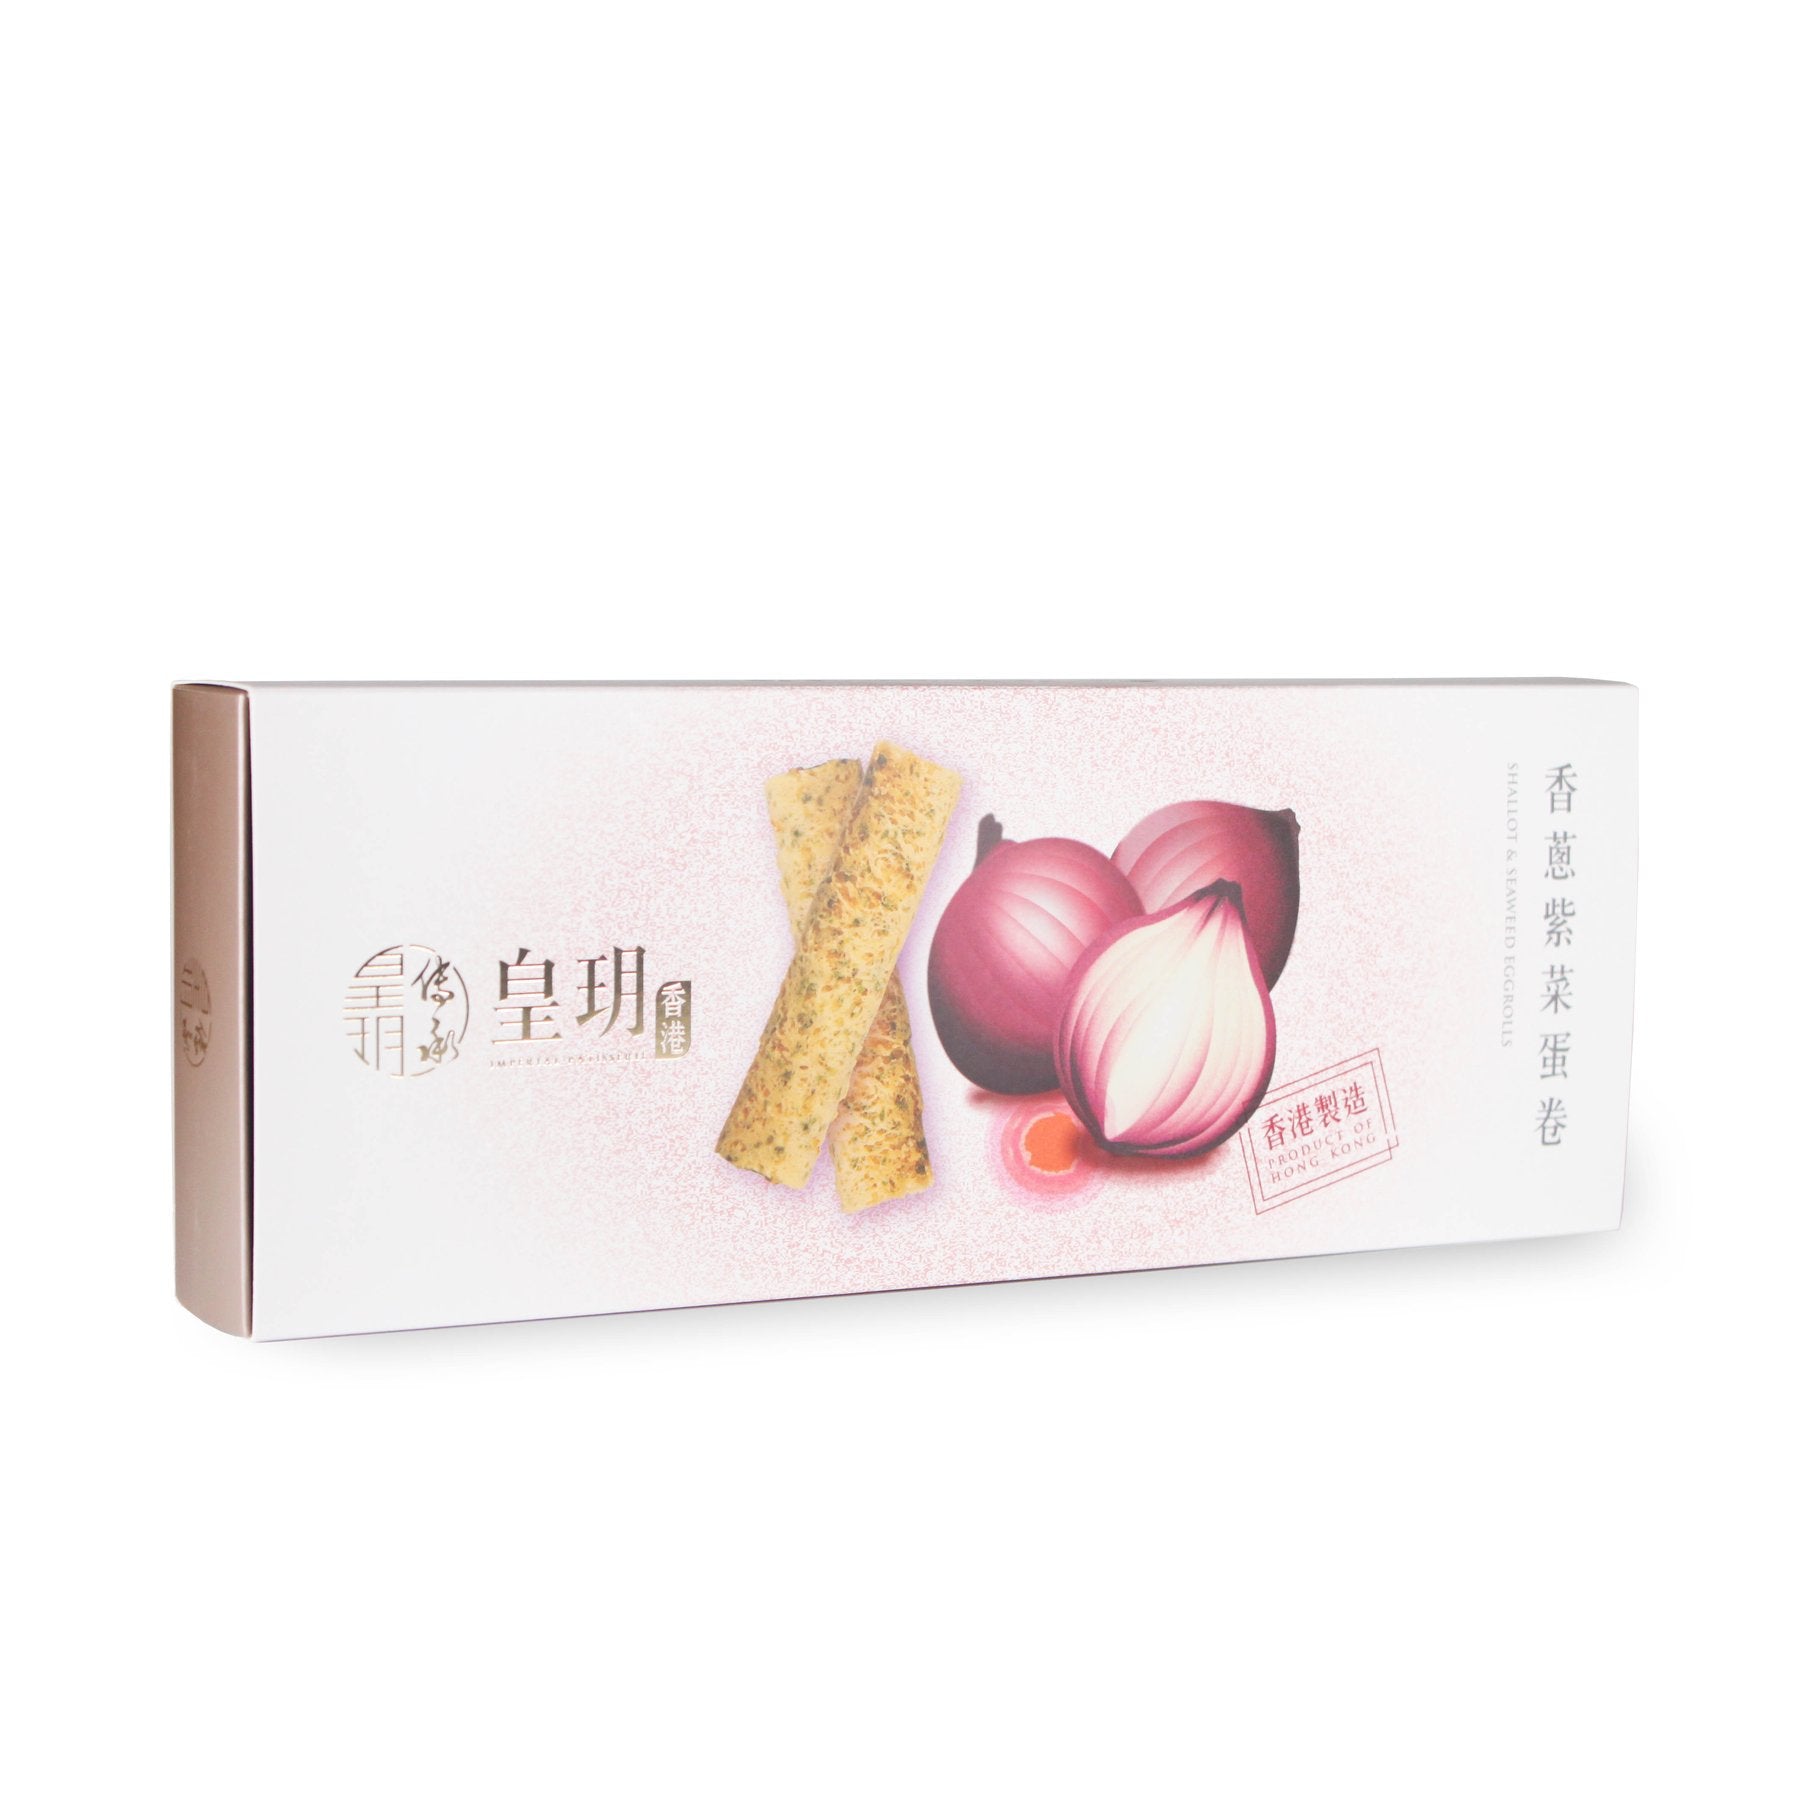 Imperial Patisserie Shallot and Seaweed Eggrolls Delight Gift Set 皇玥 香蔥紫菜蛋卷精裝禮盒